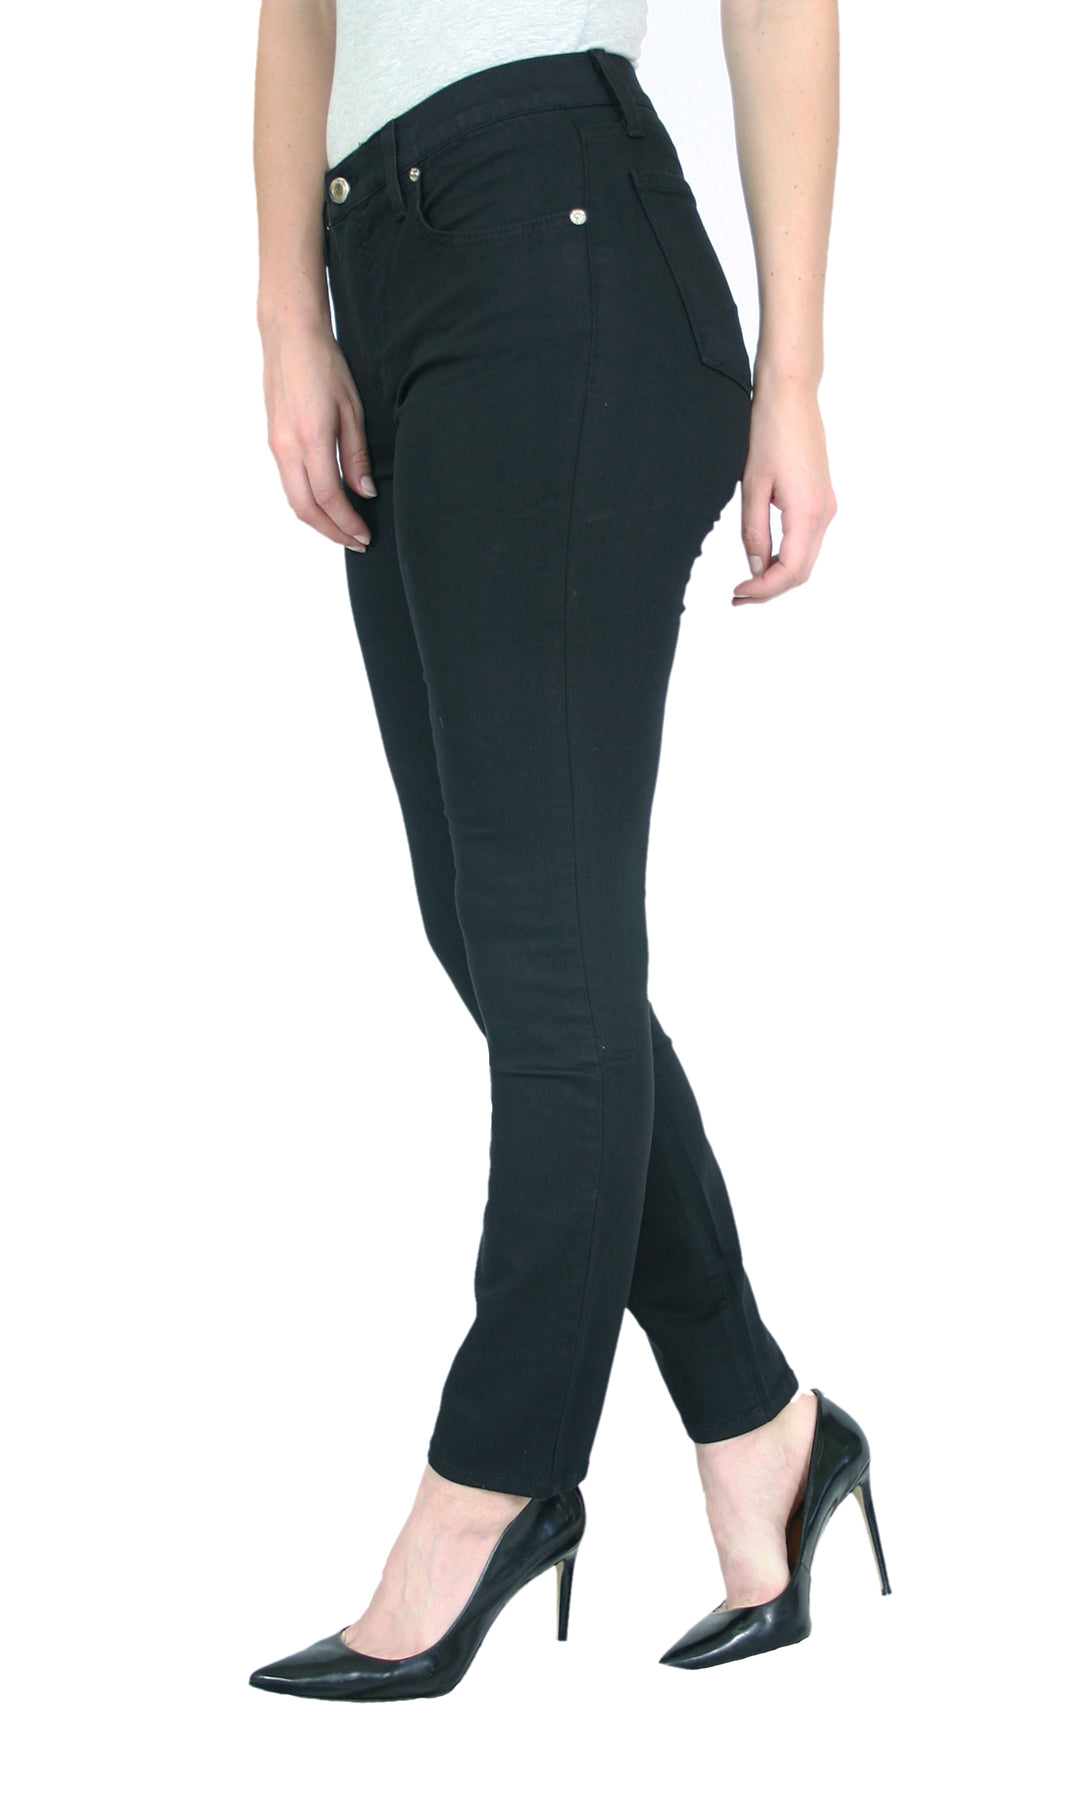 Are jeggings more comfortable than skinny jeans? Why or why not? - Quora